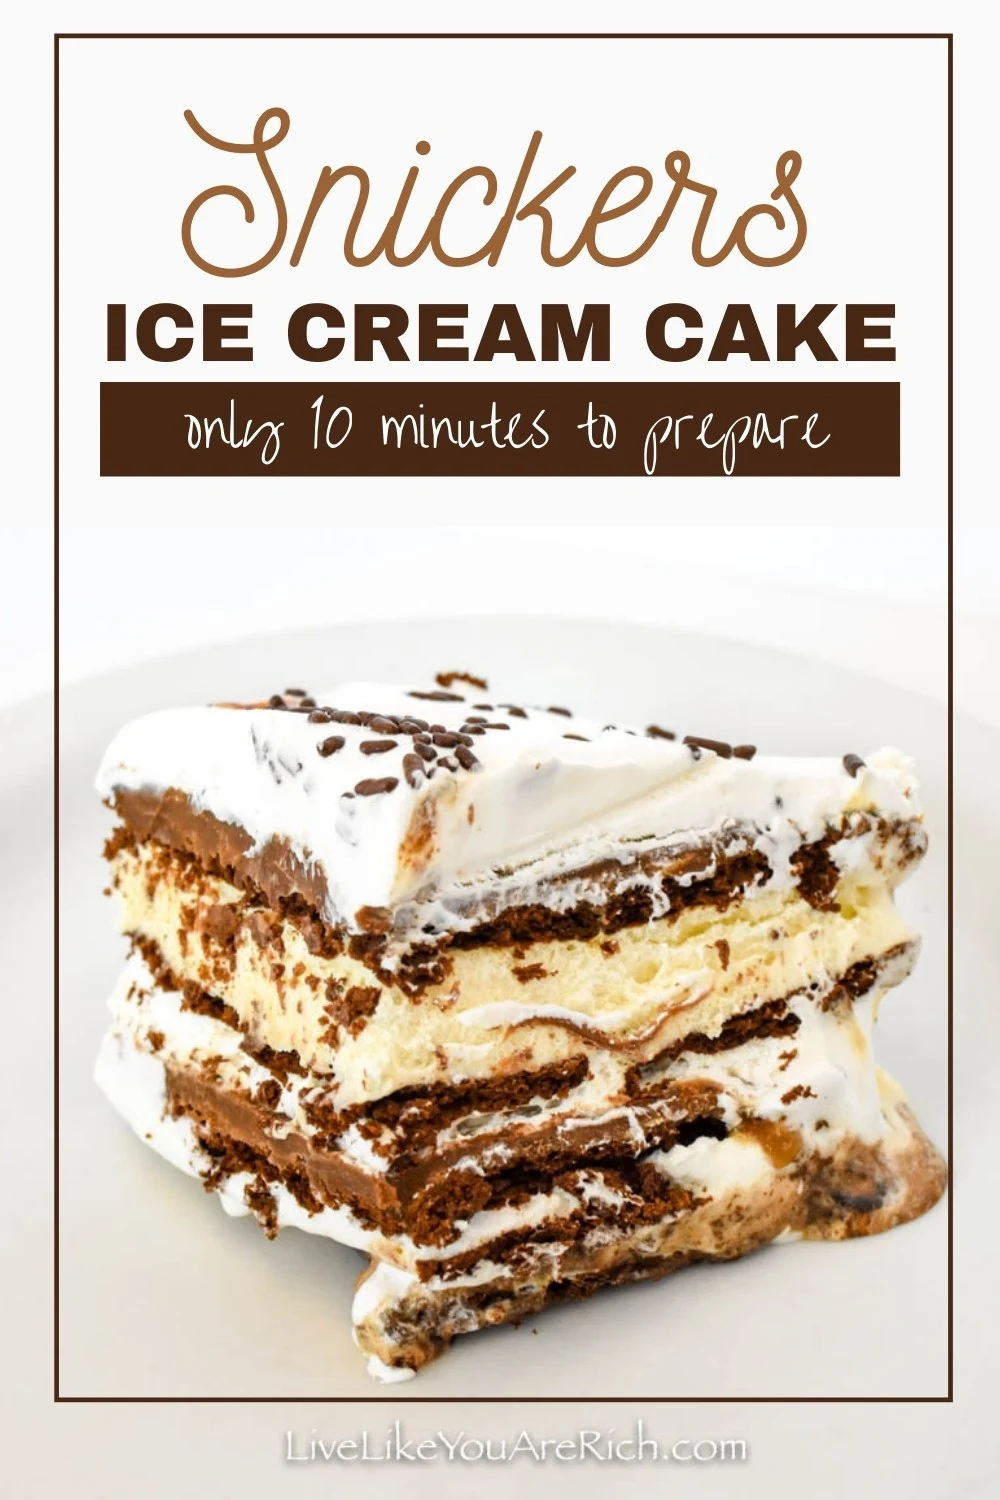 A delicious Ice Cream cake that tastes just like a Snickers Bar! Easy to assemble and well loved. This Snickers Ice Cream Cake was super easy to put together, it took about 10 minutes is all. 